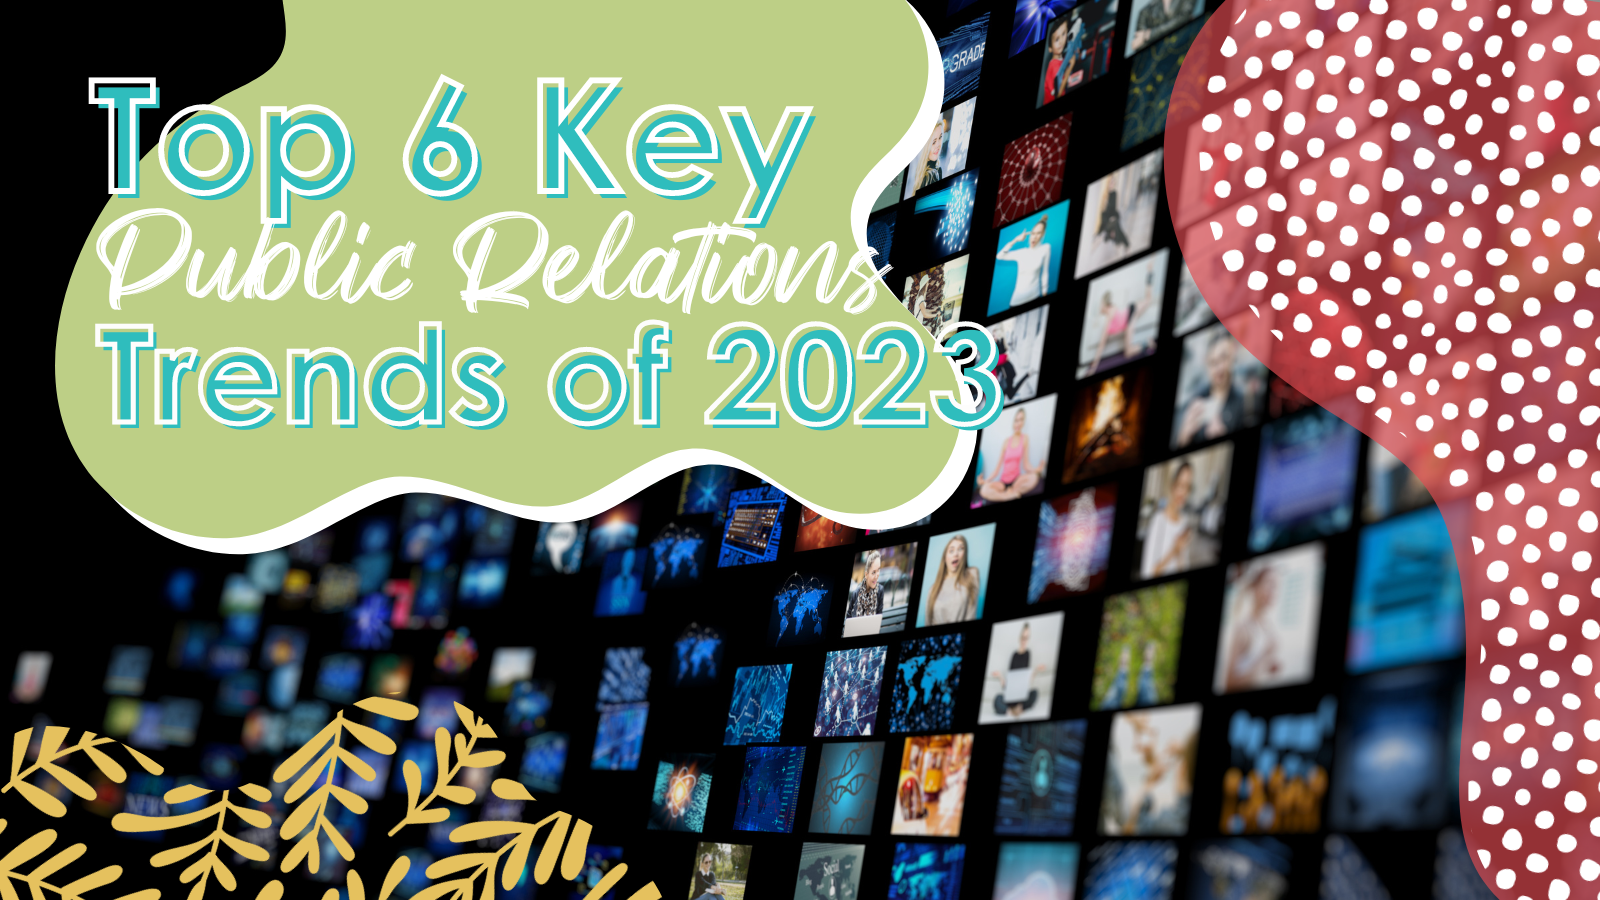 An array of screens fill the room with various faces and shows "Top 6 Key PR Trends of 2023"